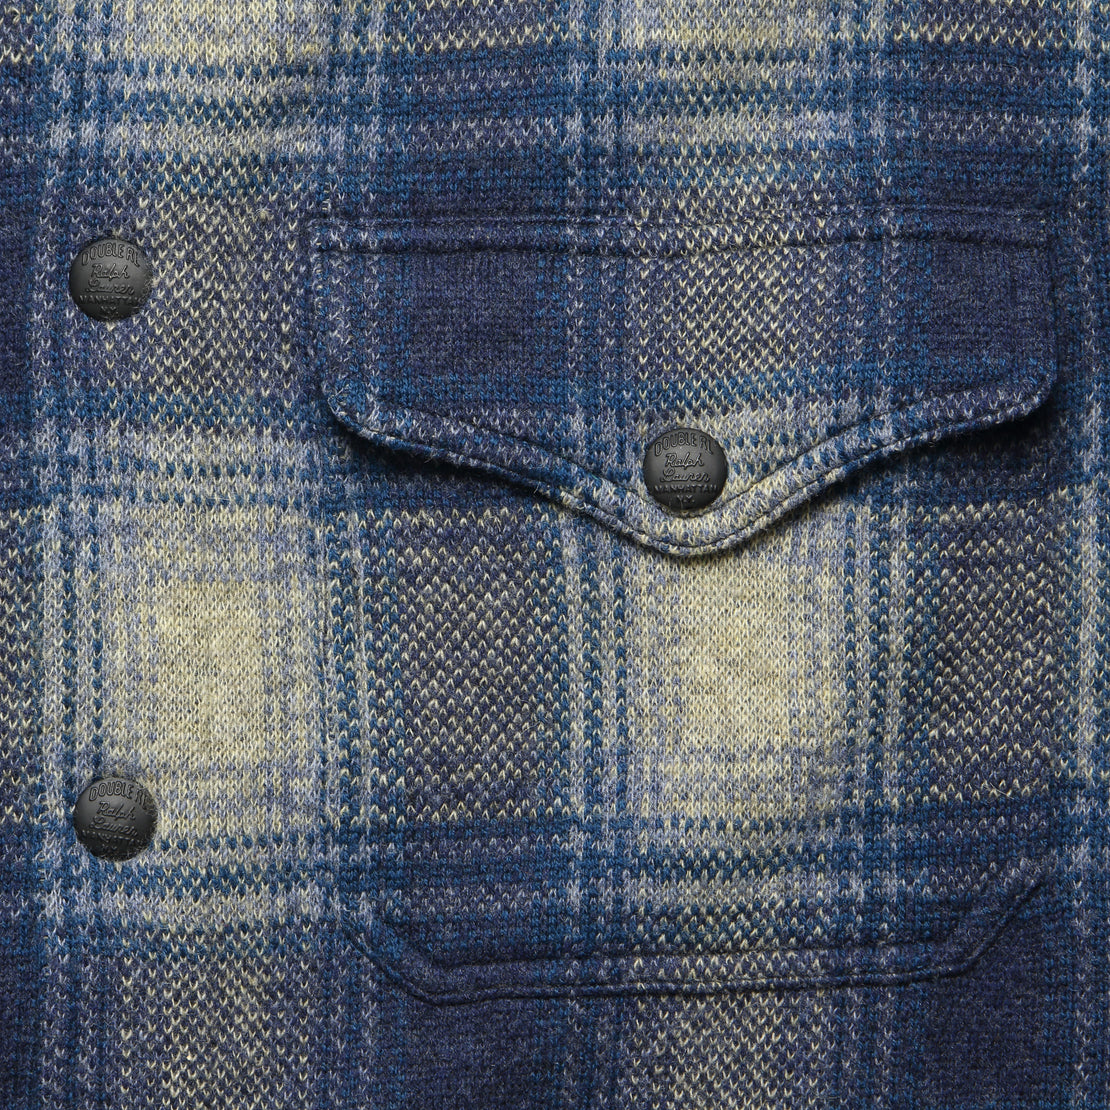 Brown Bear Overshirt - Blue/Yellow Plaid - RRL - STAG Provisions - Outerwear - Shirt Jacket